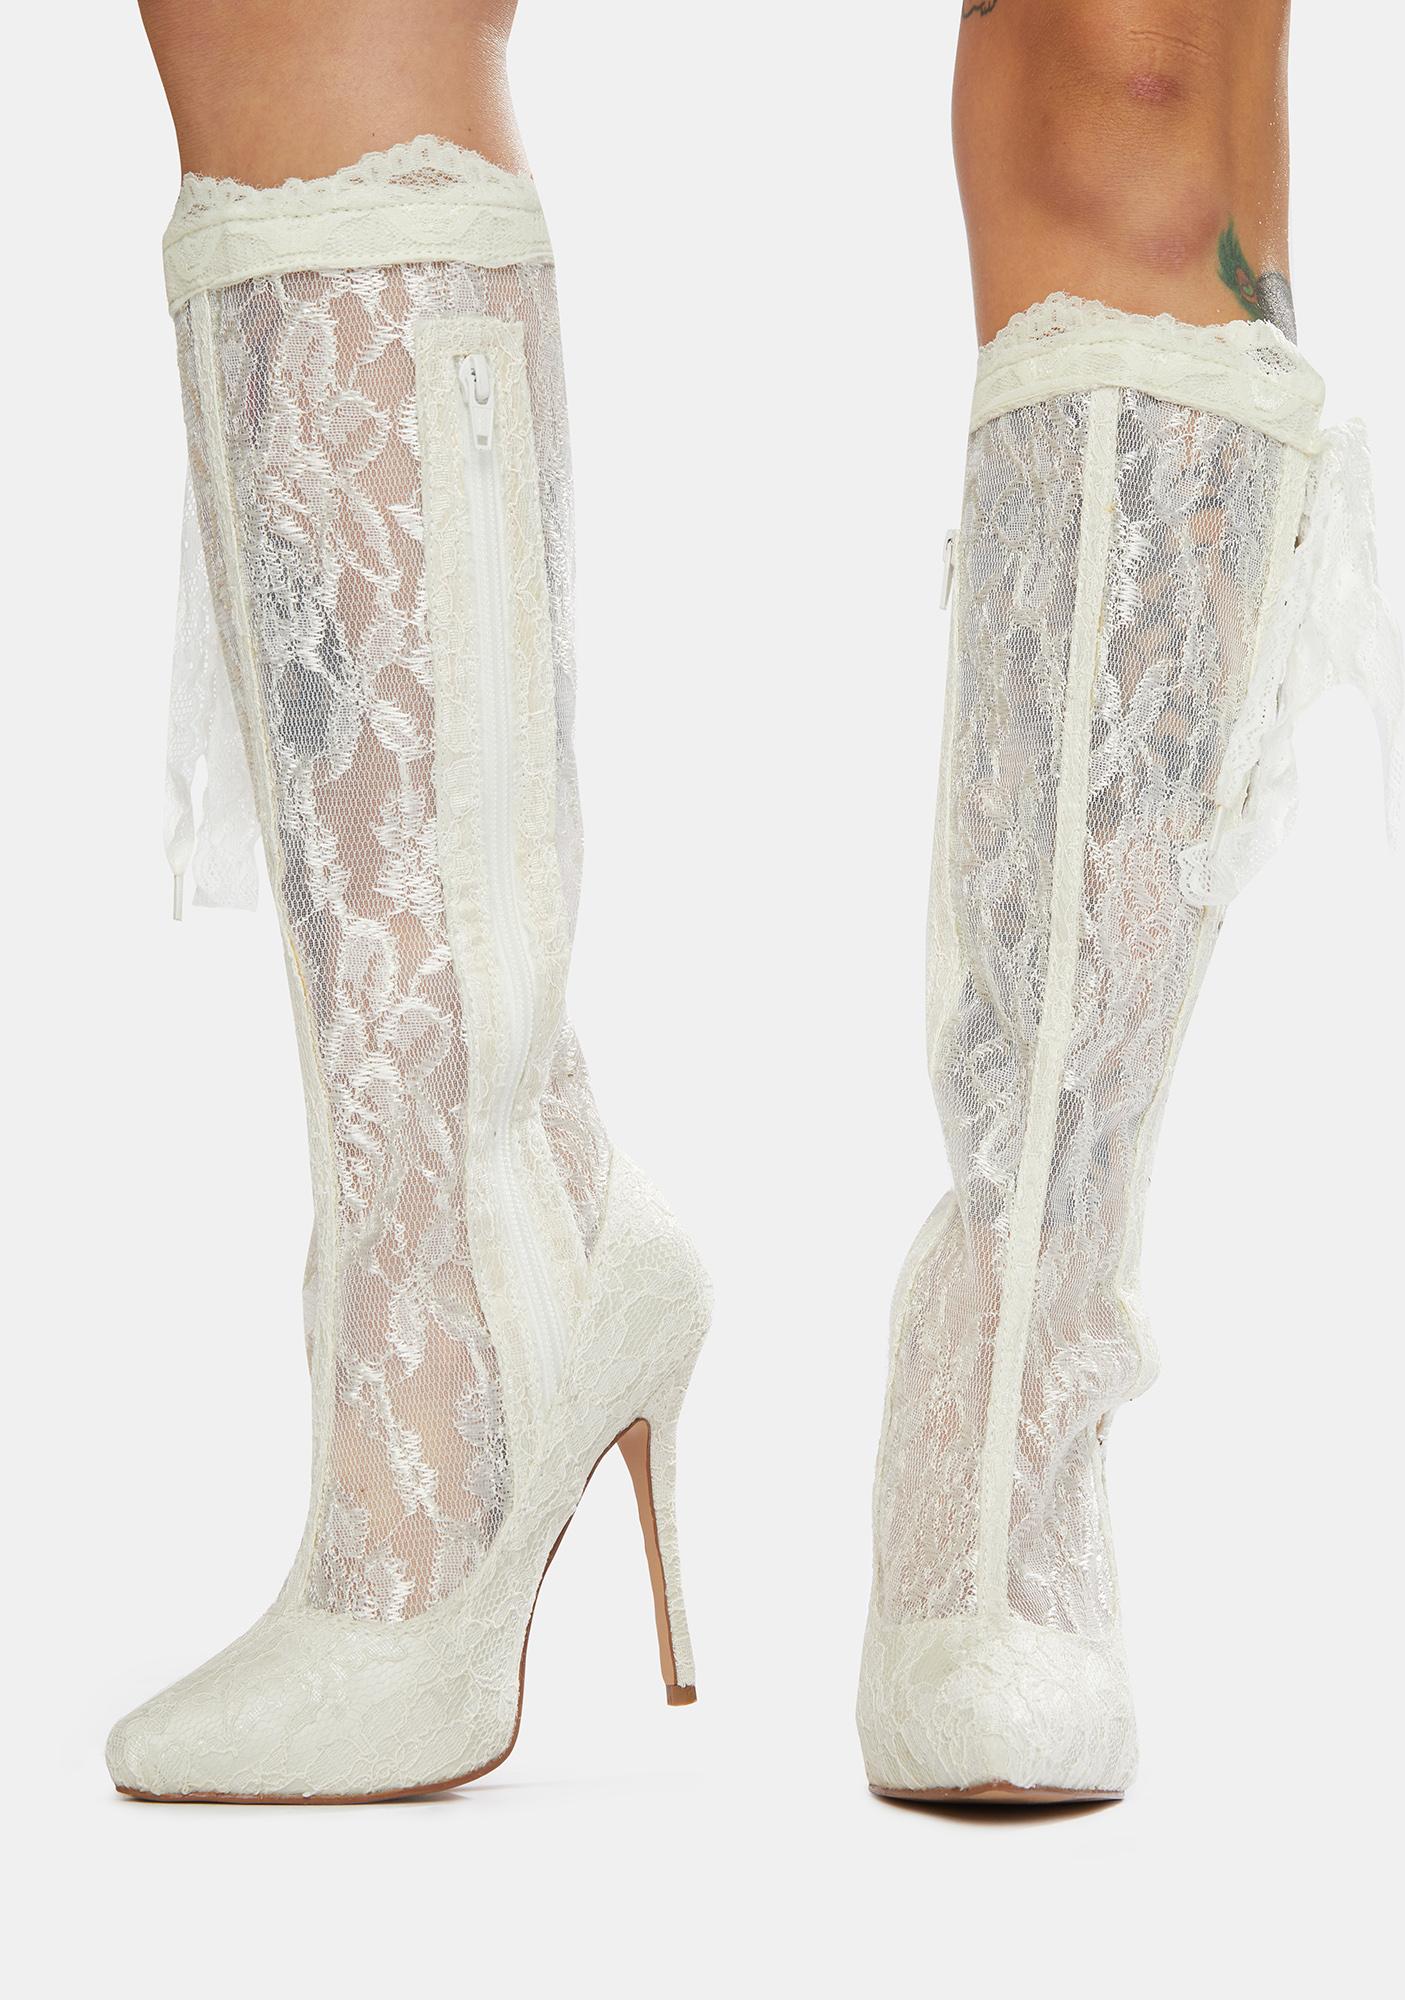 Pleaser Amuse 2012 Lace Up Knee High Boots - White | Dolls Kill